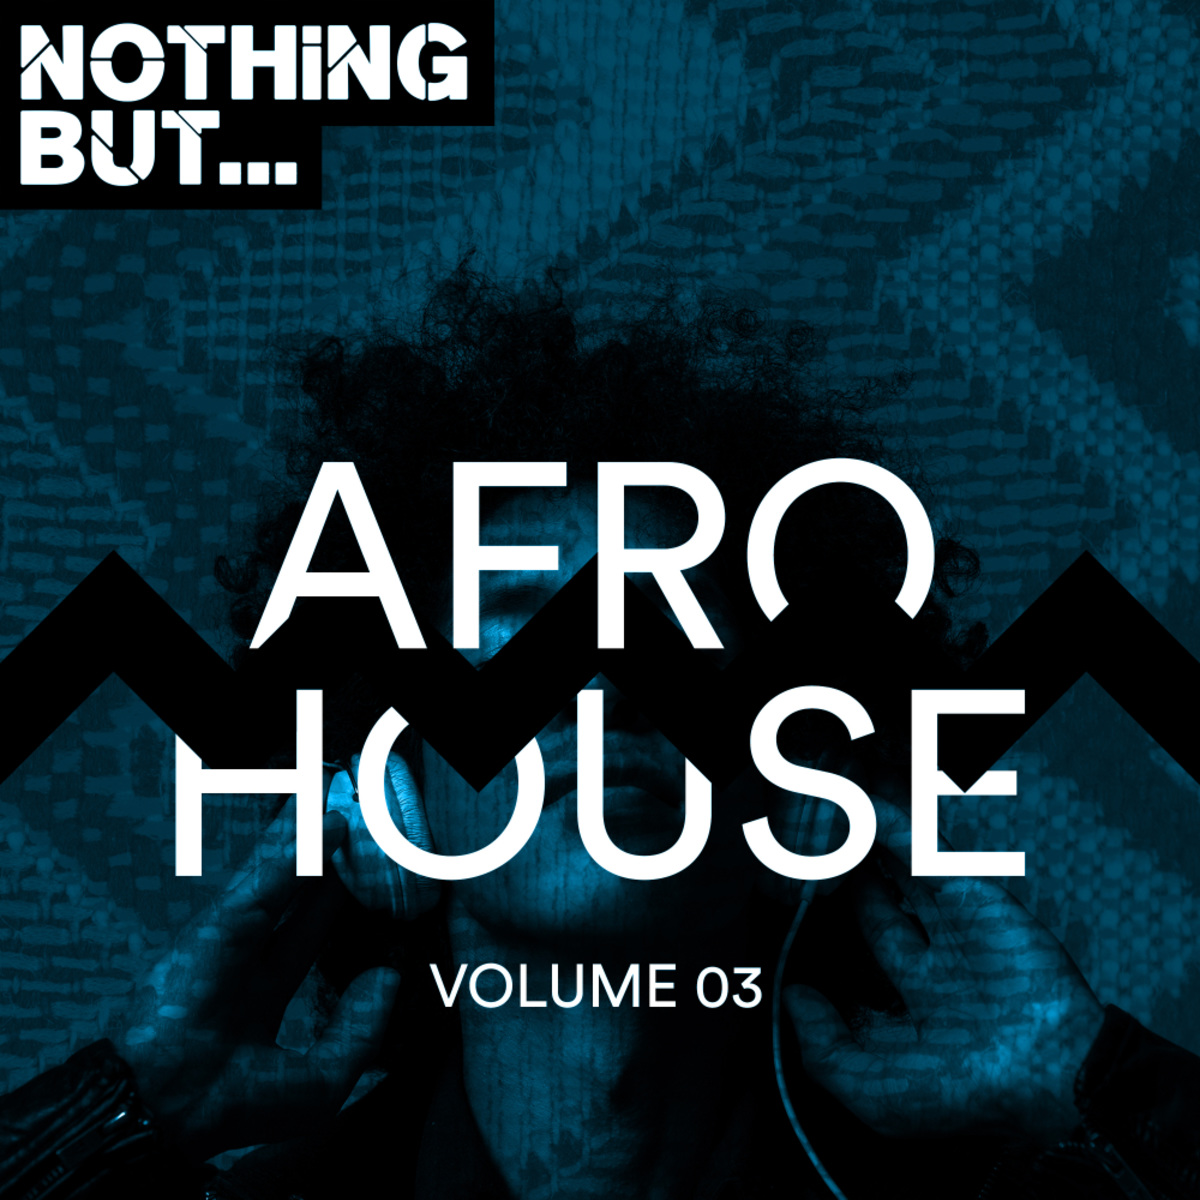 VA - Nothing But... Afro House, Vol. 03 / Nothing But